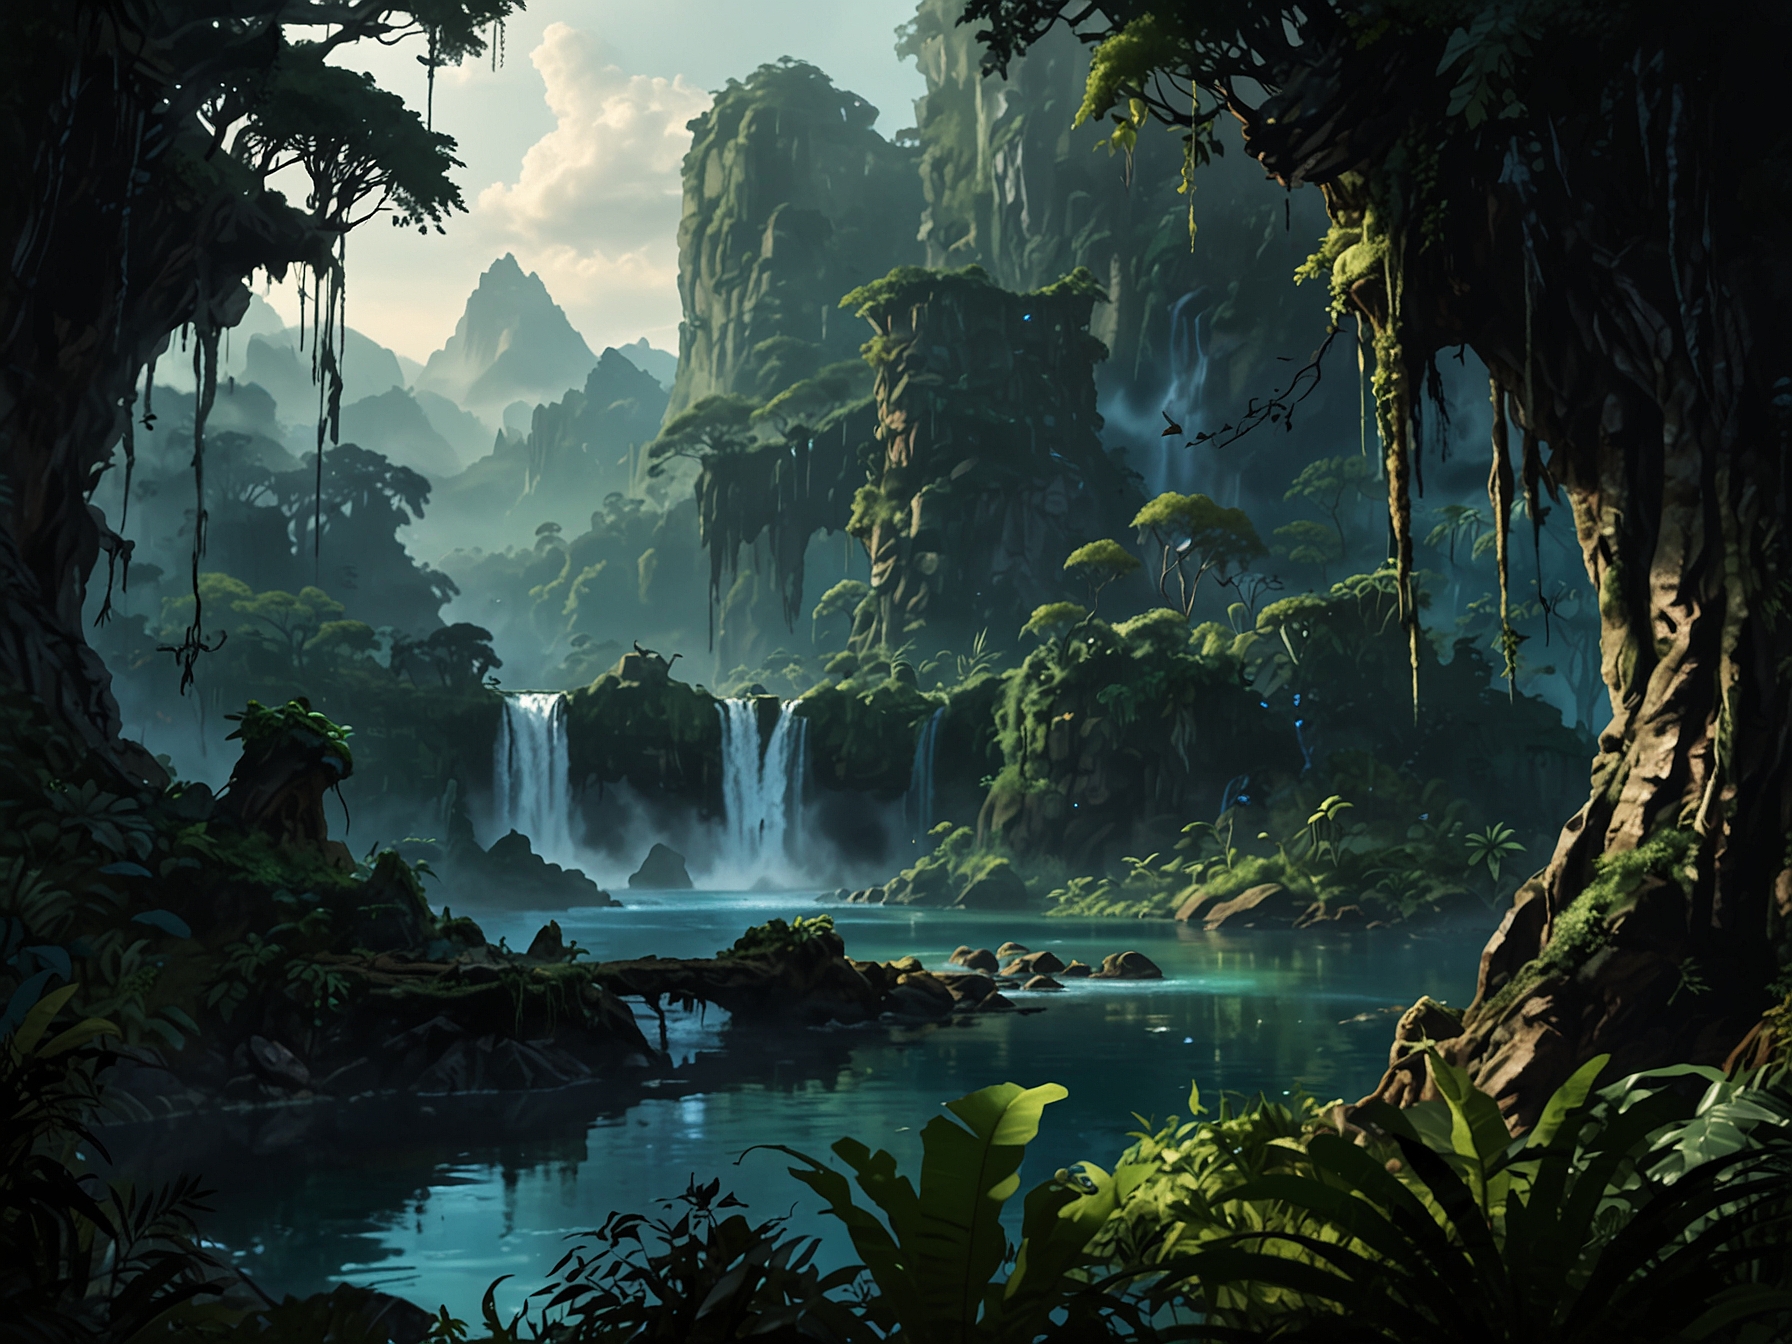 Image from 'Avatar,' displaying lush, fictional landscapes of Pandora, emphasizing the film's environmental themes and the battle to protect natural resources.